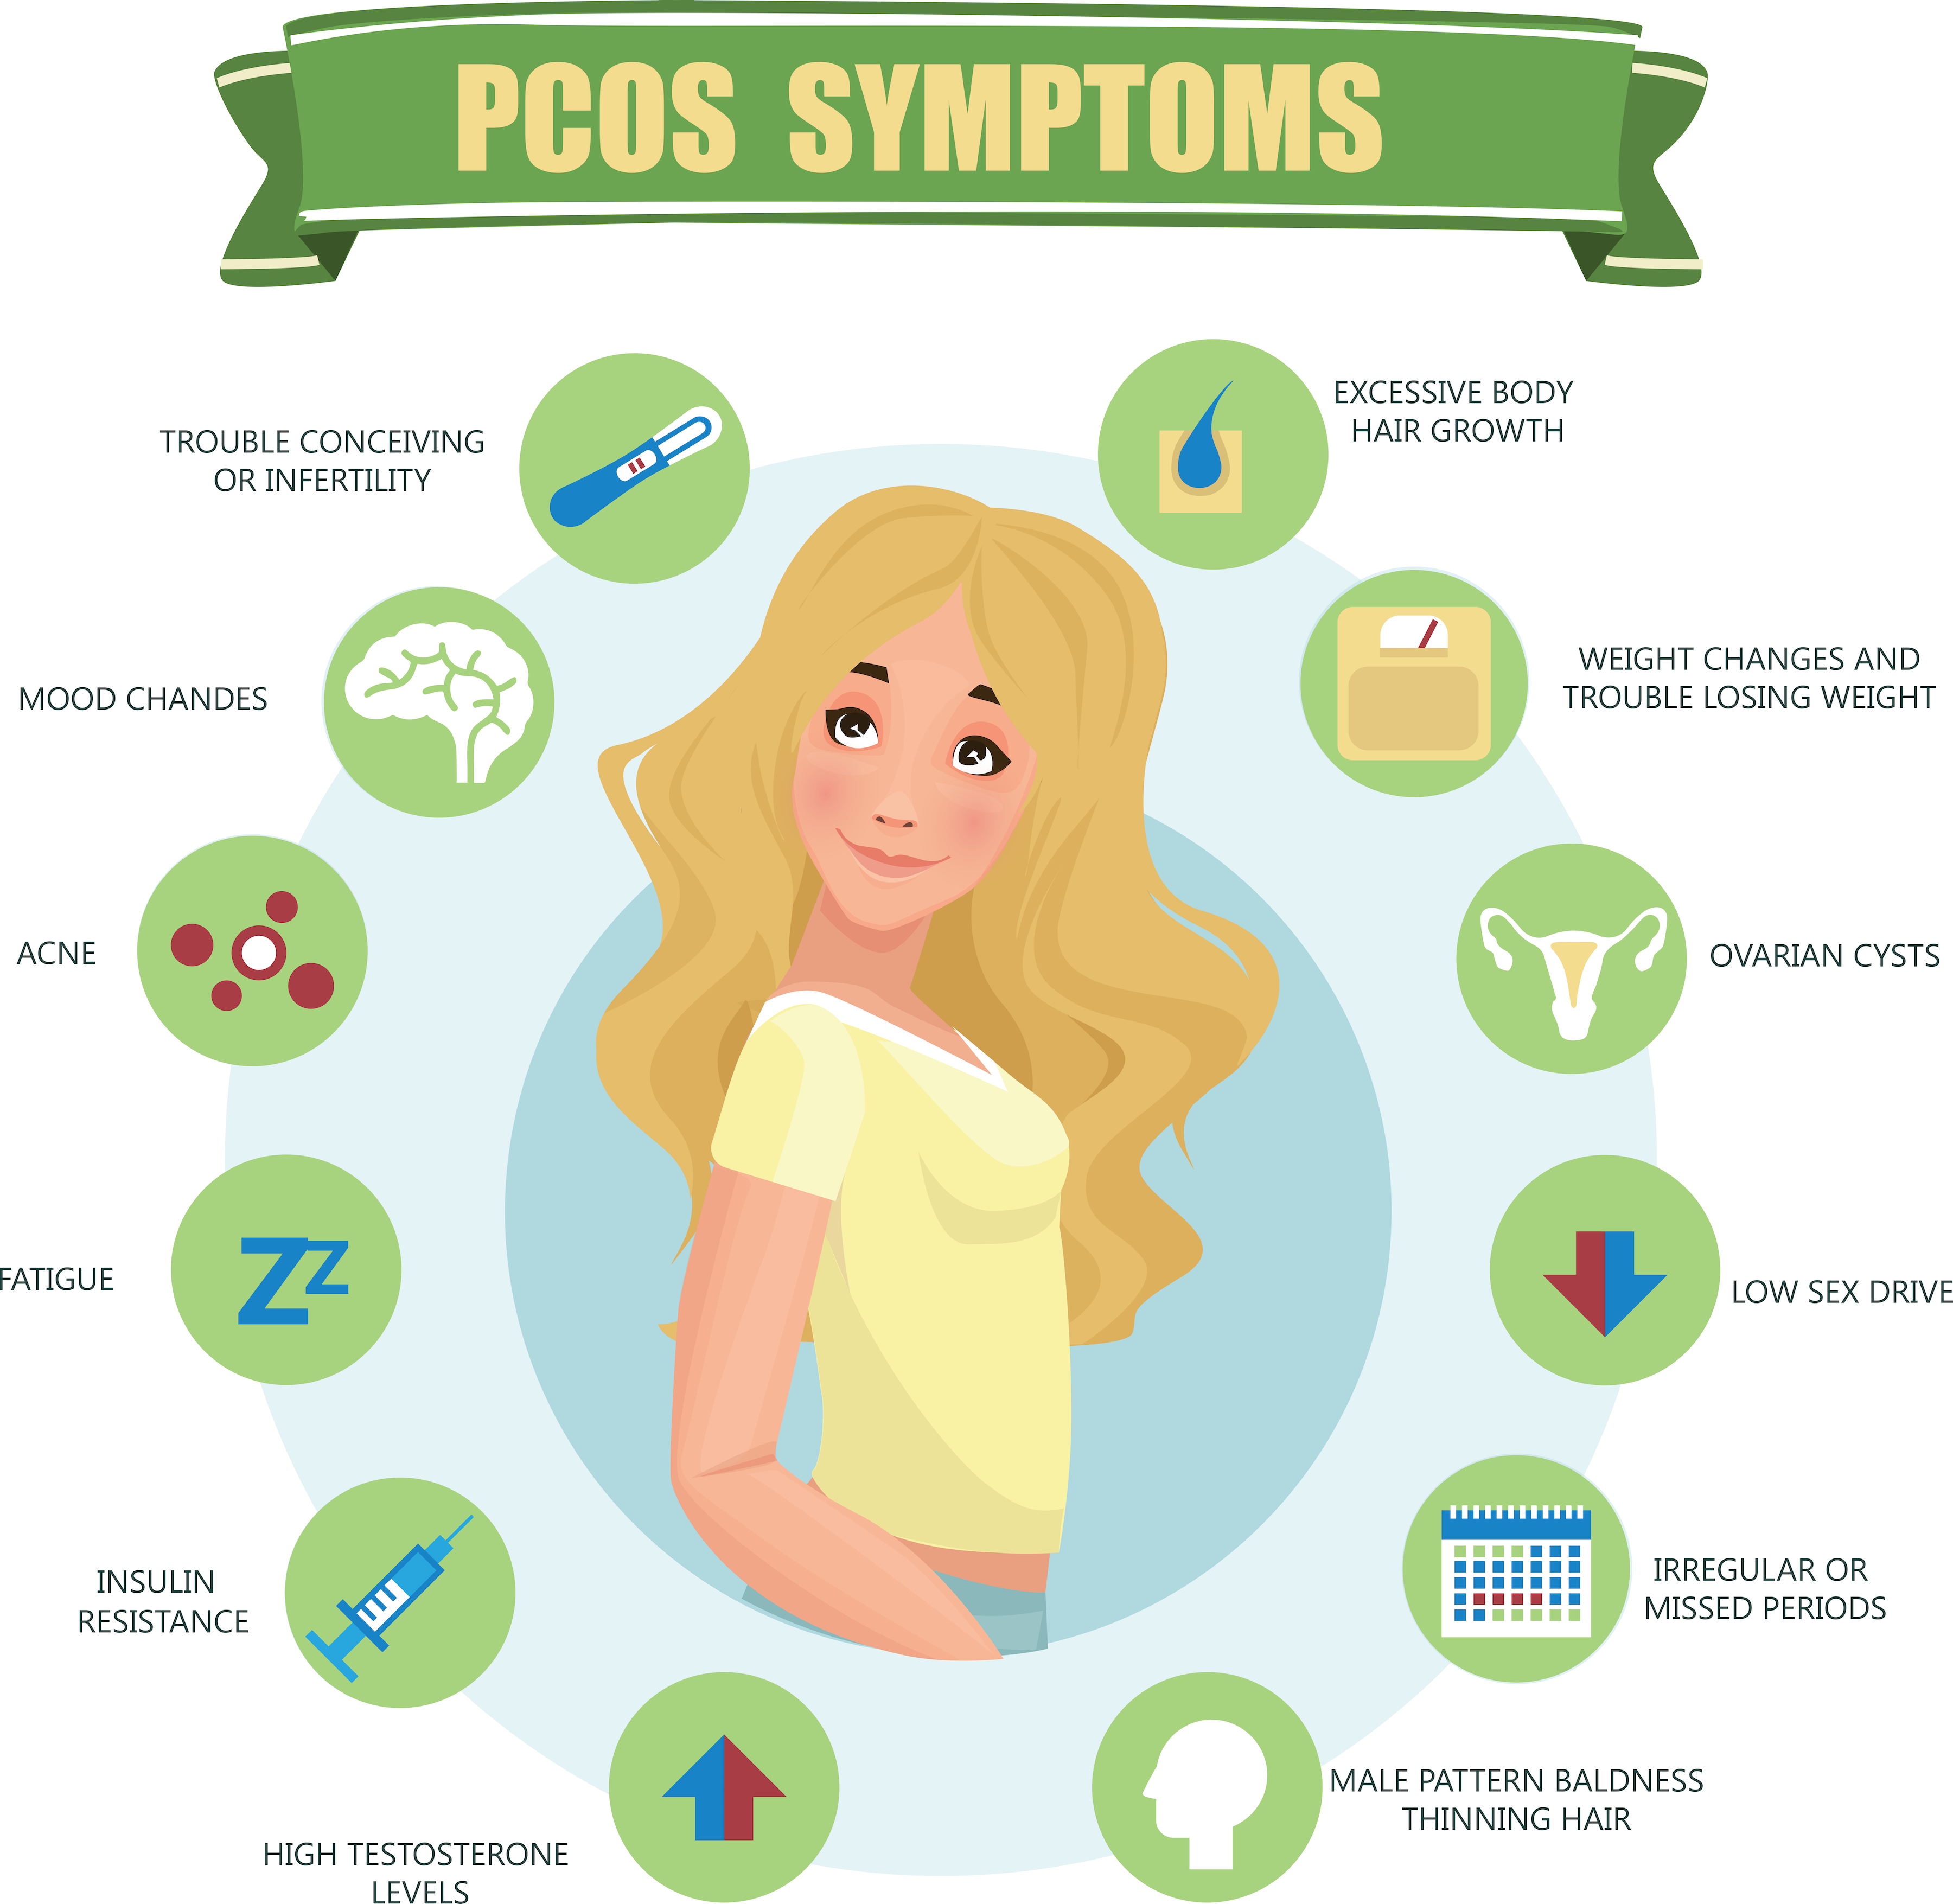 What is polycystic ovary syndrome?